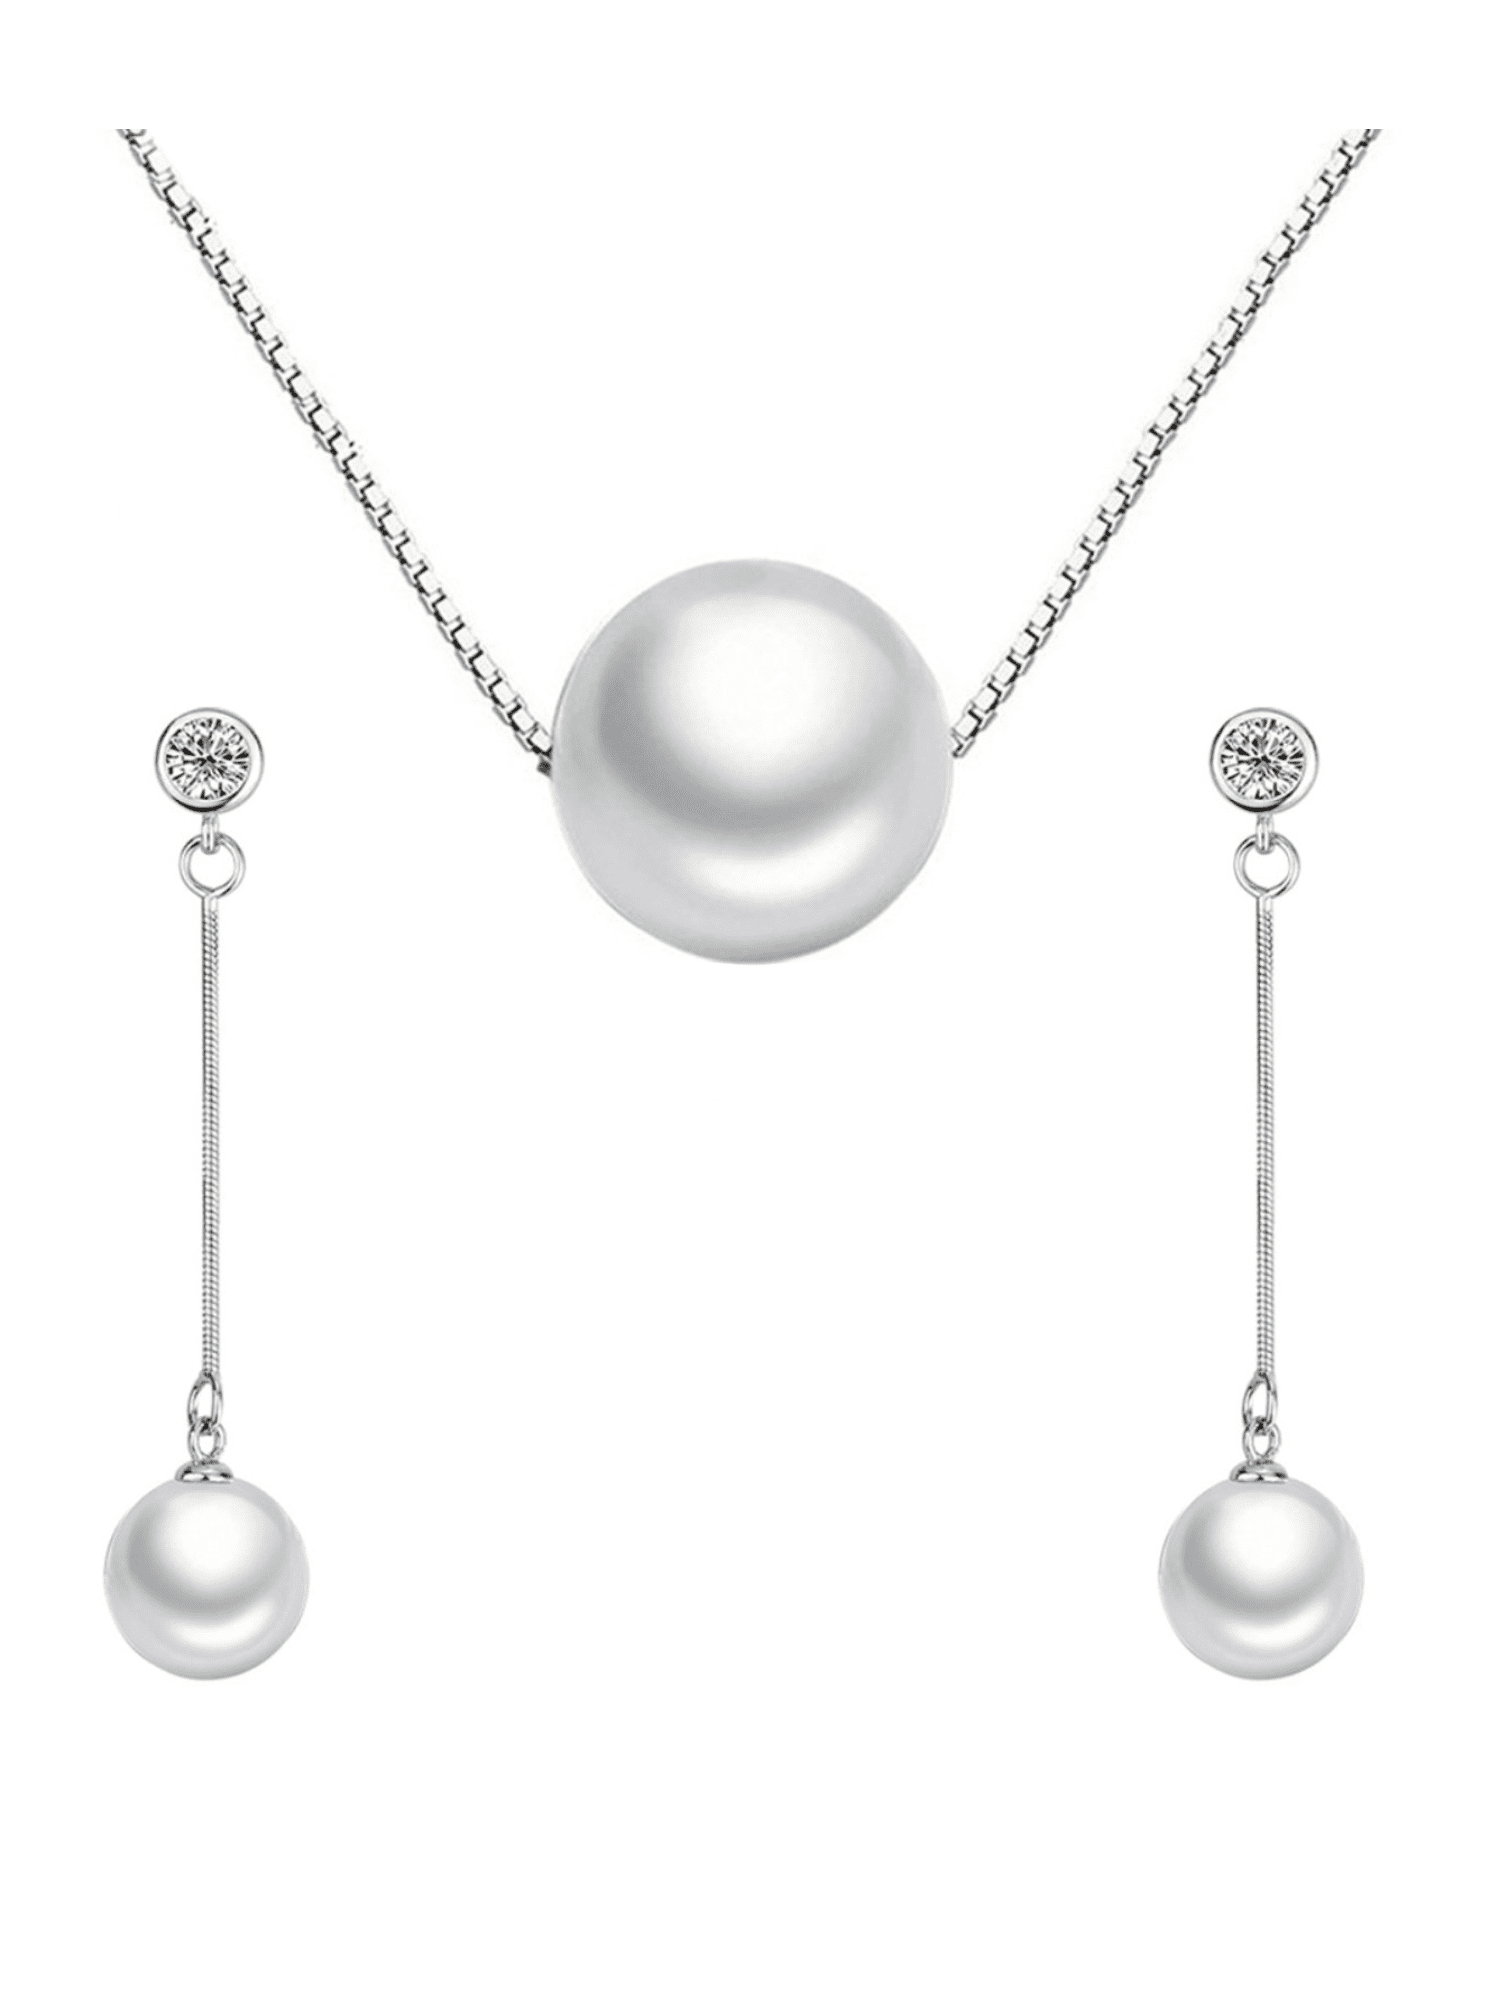 Clearine 925 Sterling Sliver CZ Freshwater Pearl Pendant Necklace Dangle Hook Earrings Jewellery Set for Wedding Bridal